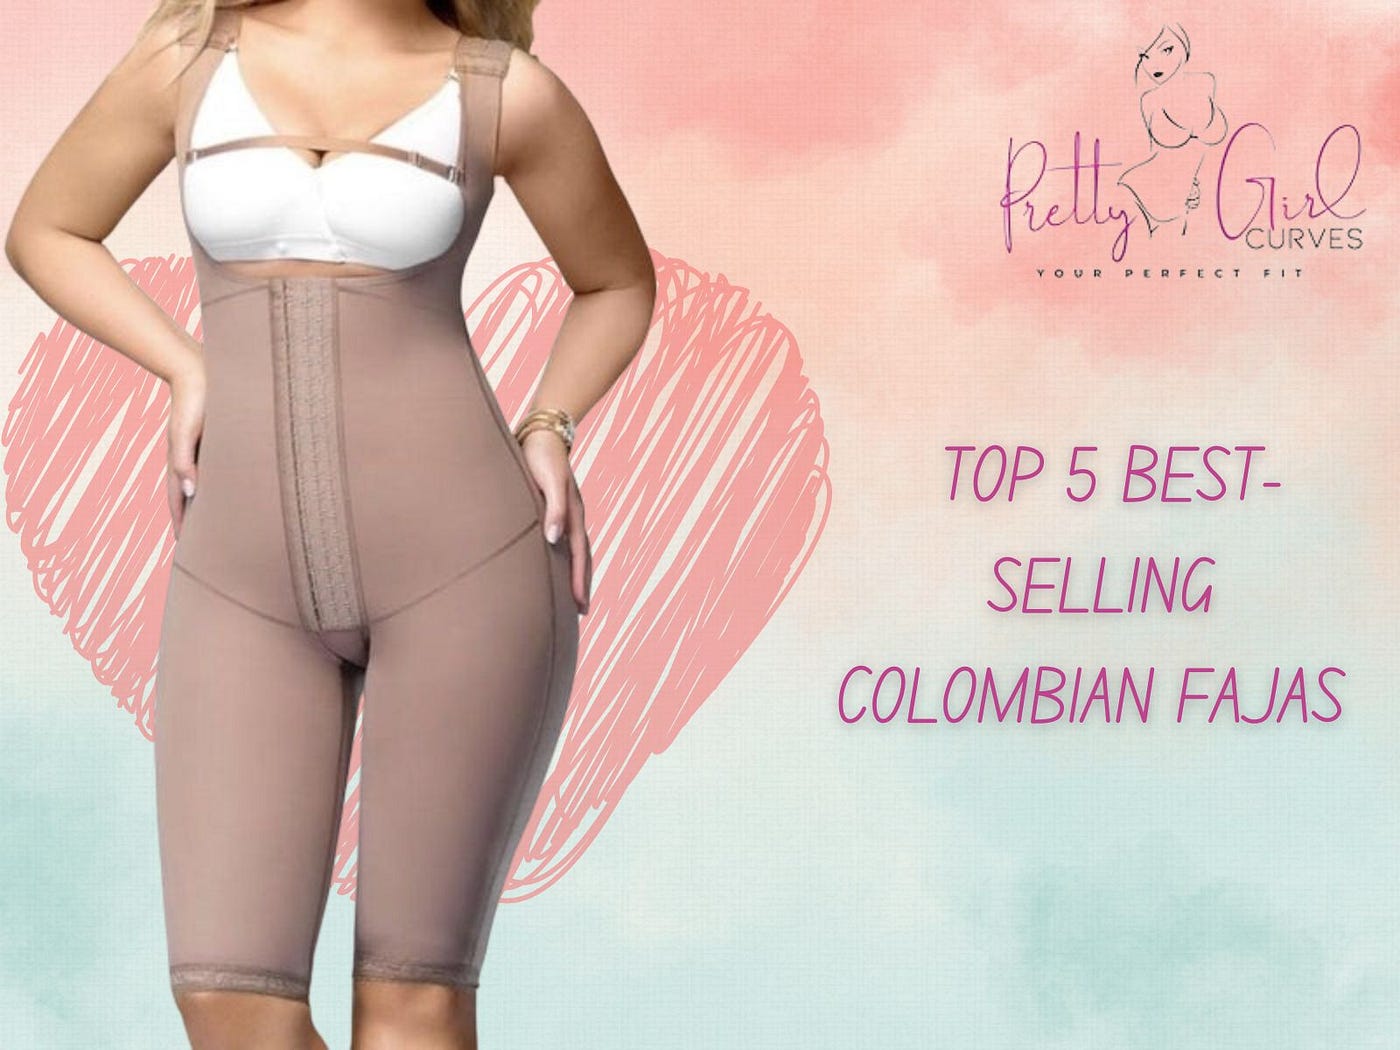 CHECK OUT OUR TOP 5 BEST-SELLING COLOMBIAN FAJAS AND GET THE